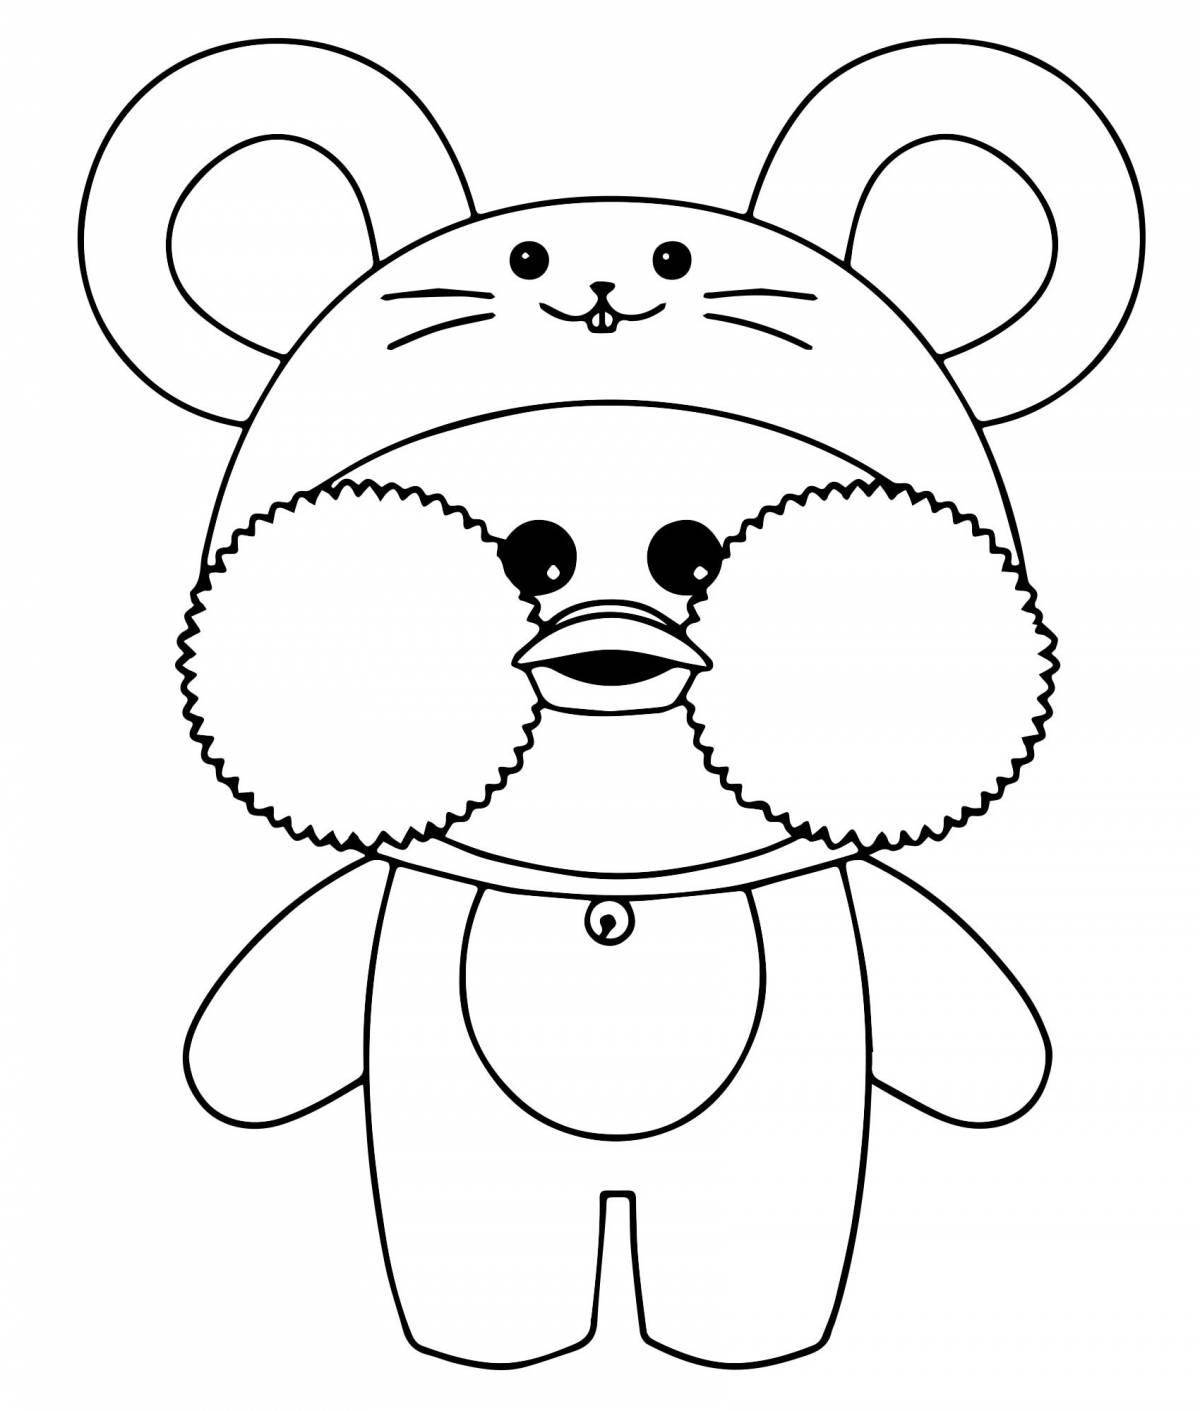 Lalafanfan cute duck coloring pages for kids